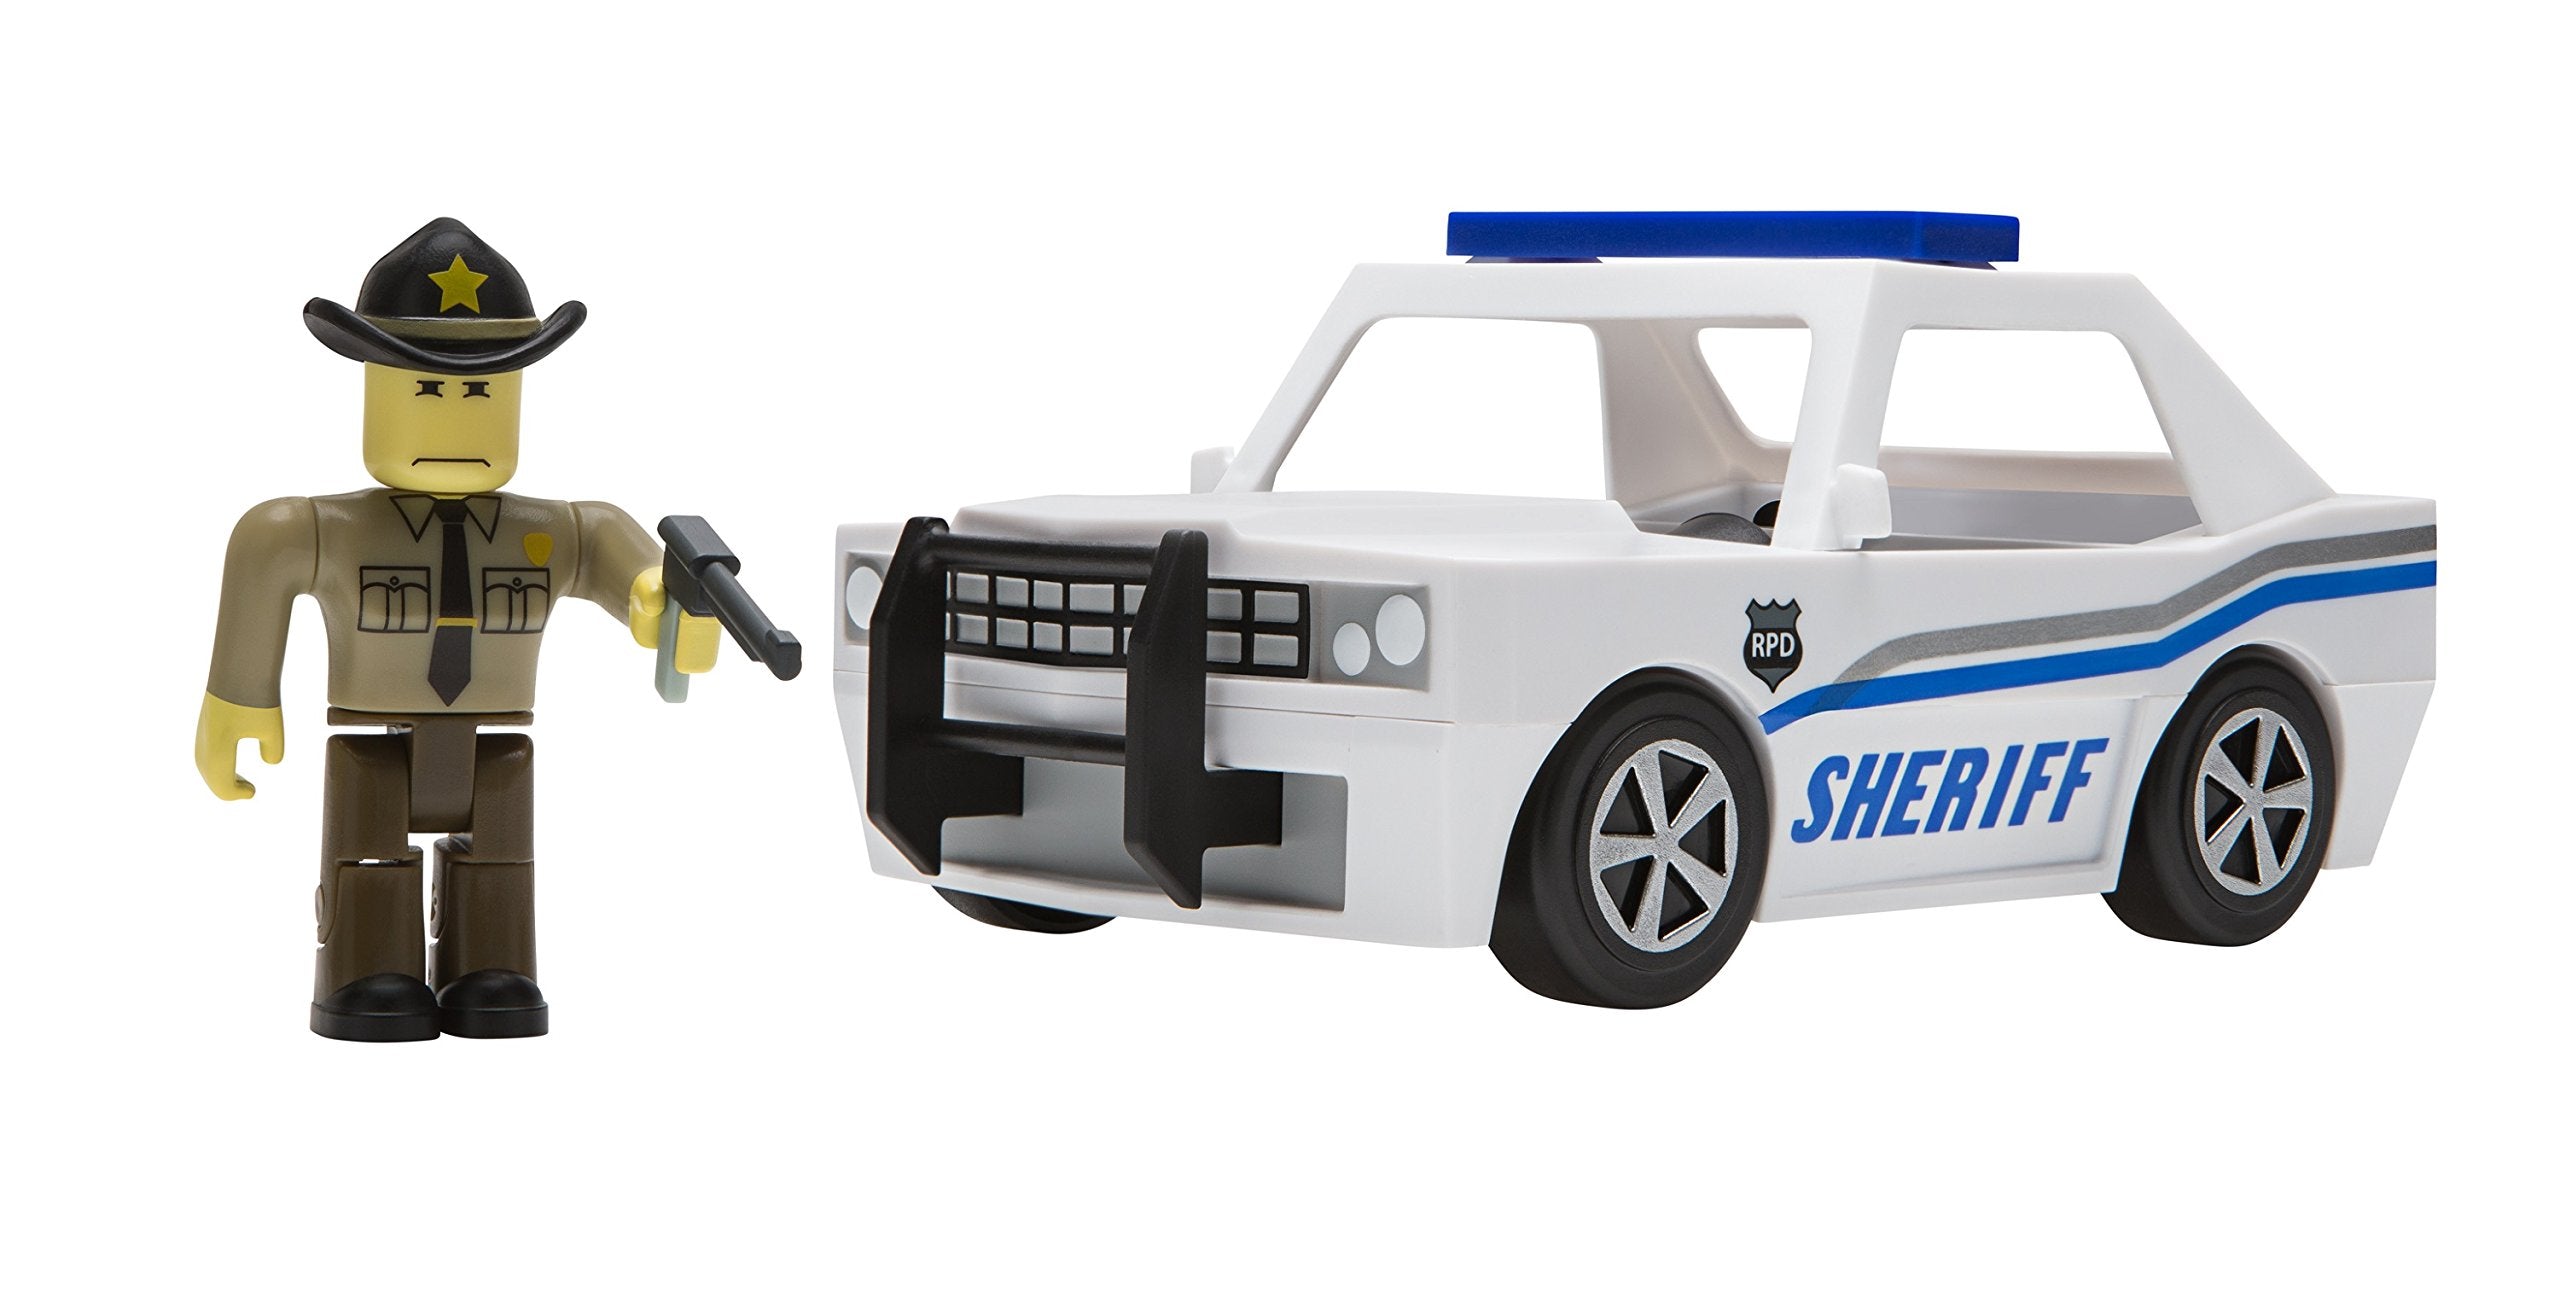 Other Toys Roblox The Neighborhood Of Robloxia Patrol Car Vehicle Was Listed For R874 95 On 13 Mar At 22 19 By Papertown Africa In Outside South Africa Id 397287205 - roblox homegarden south africa buy roblox homegarden online wantitall